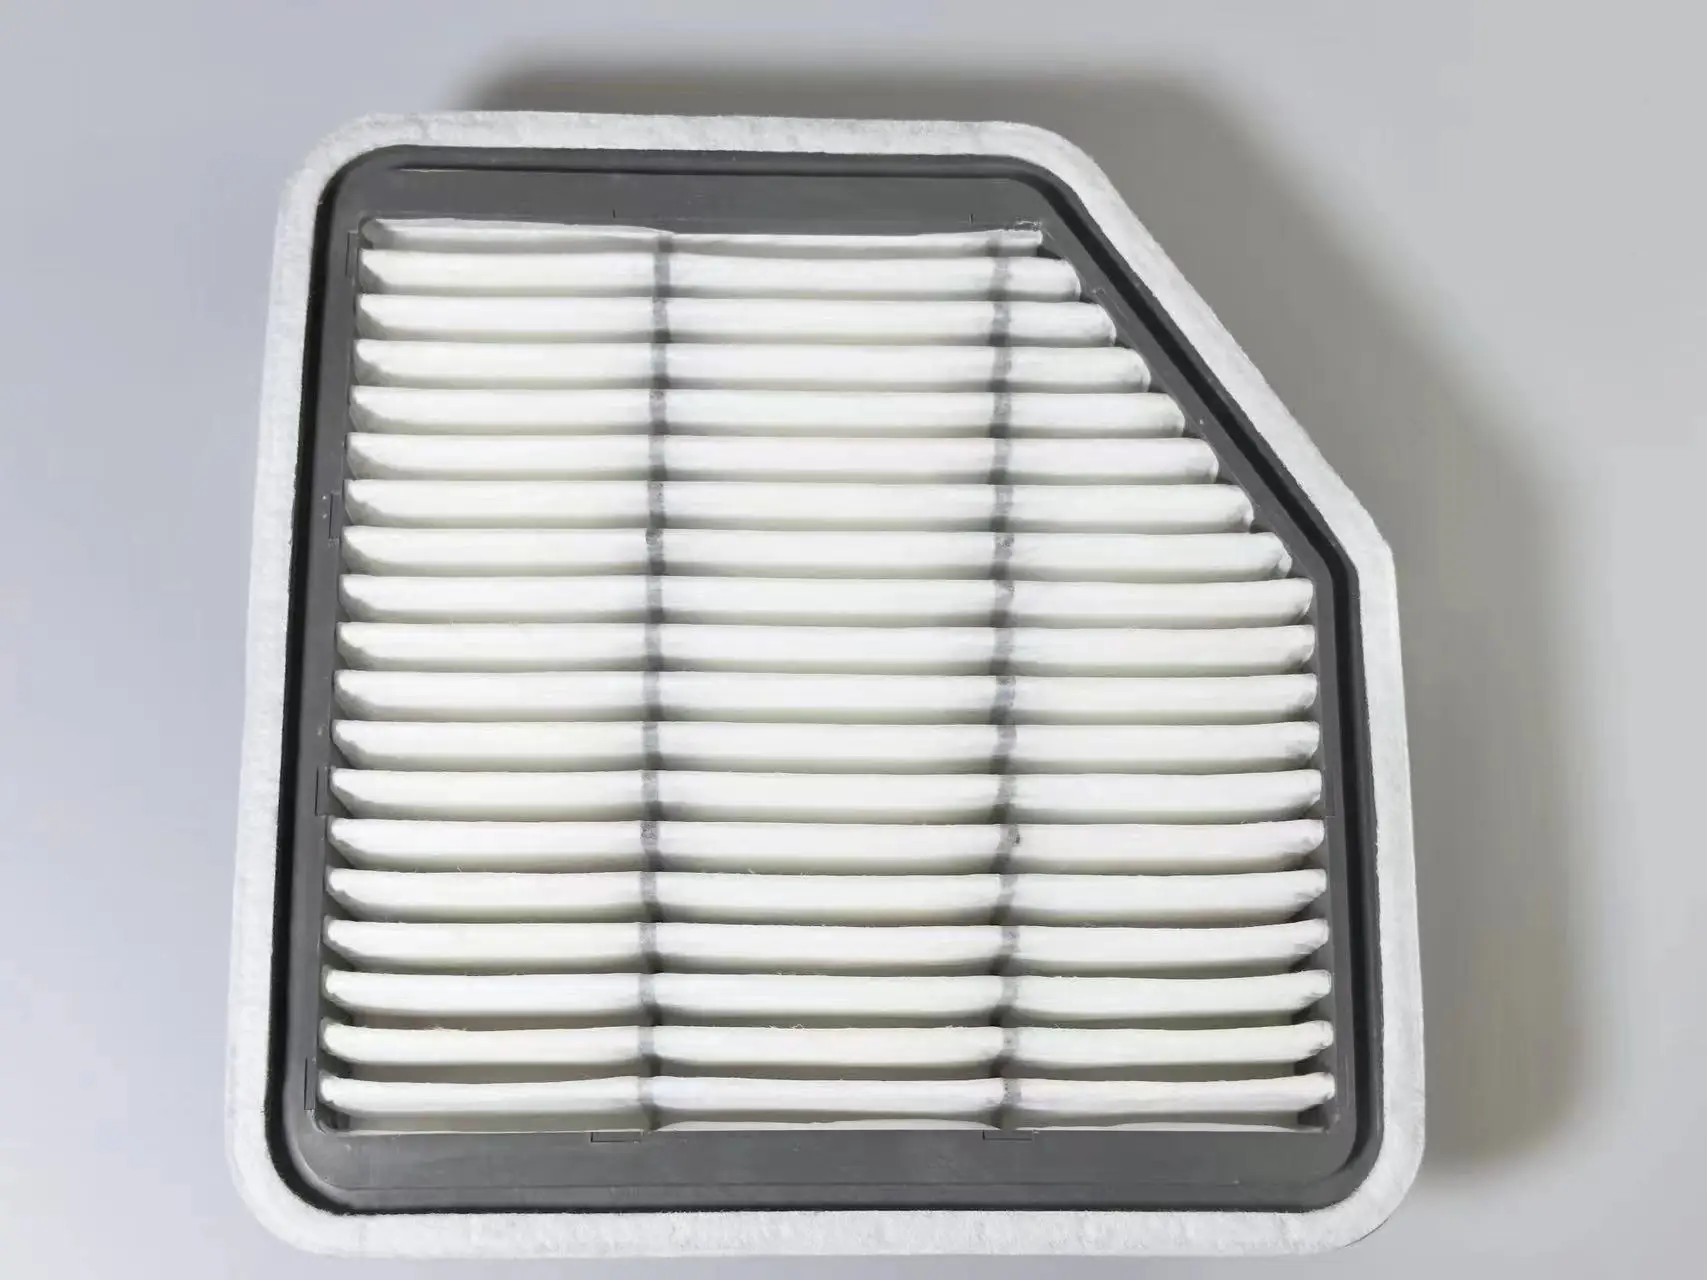 

Car Engine Air Filter For Lexus IS250 IS300 IS350 IS250C IS300C GS300 GS350 GS430 GS460 Toyota REIZ OEM 17801-31110